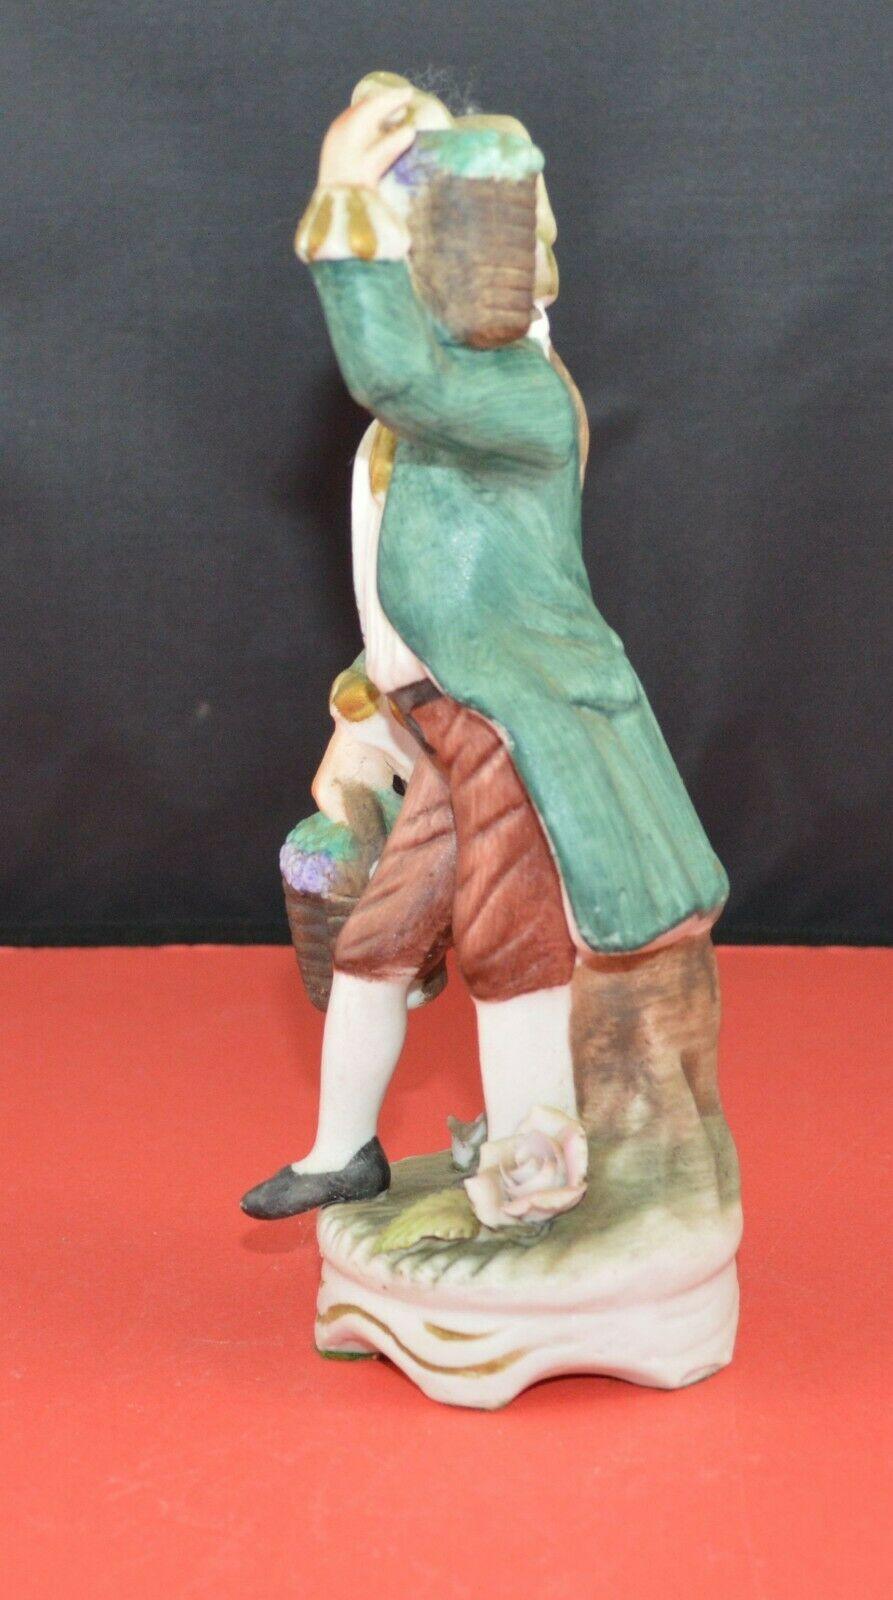 TWO DECORATIVE FIGURINES MALE & FEMALE FRUIT SELLERS - TMD167207